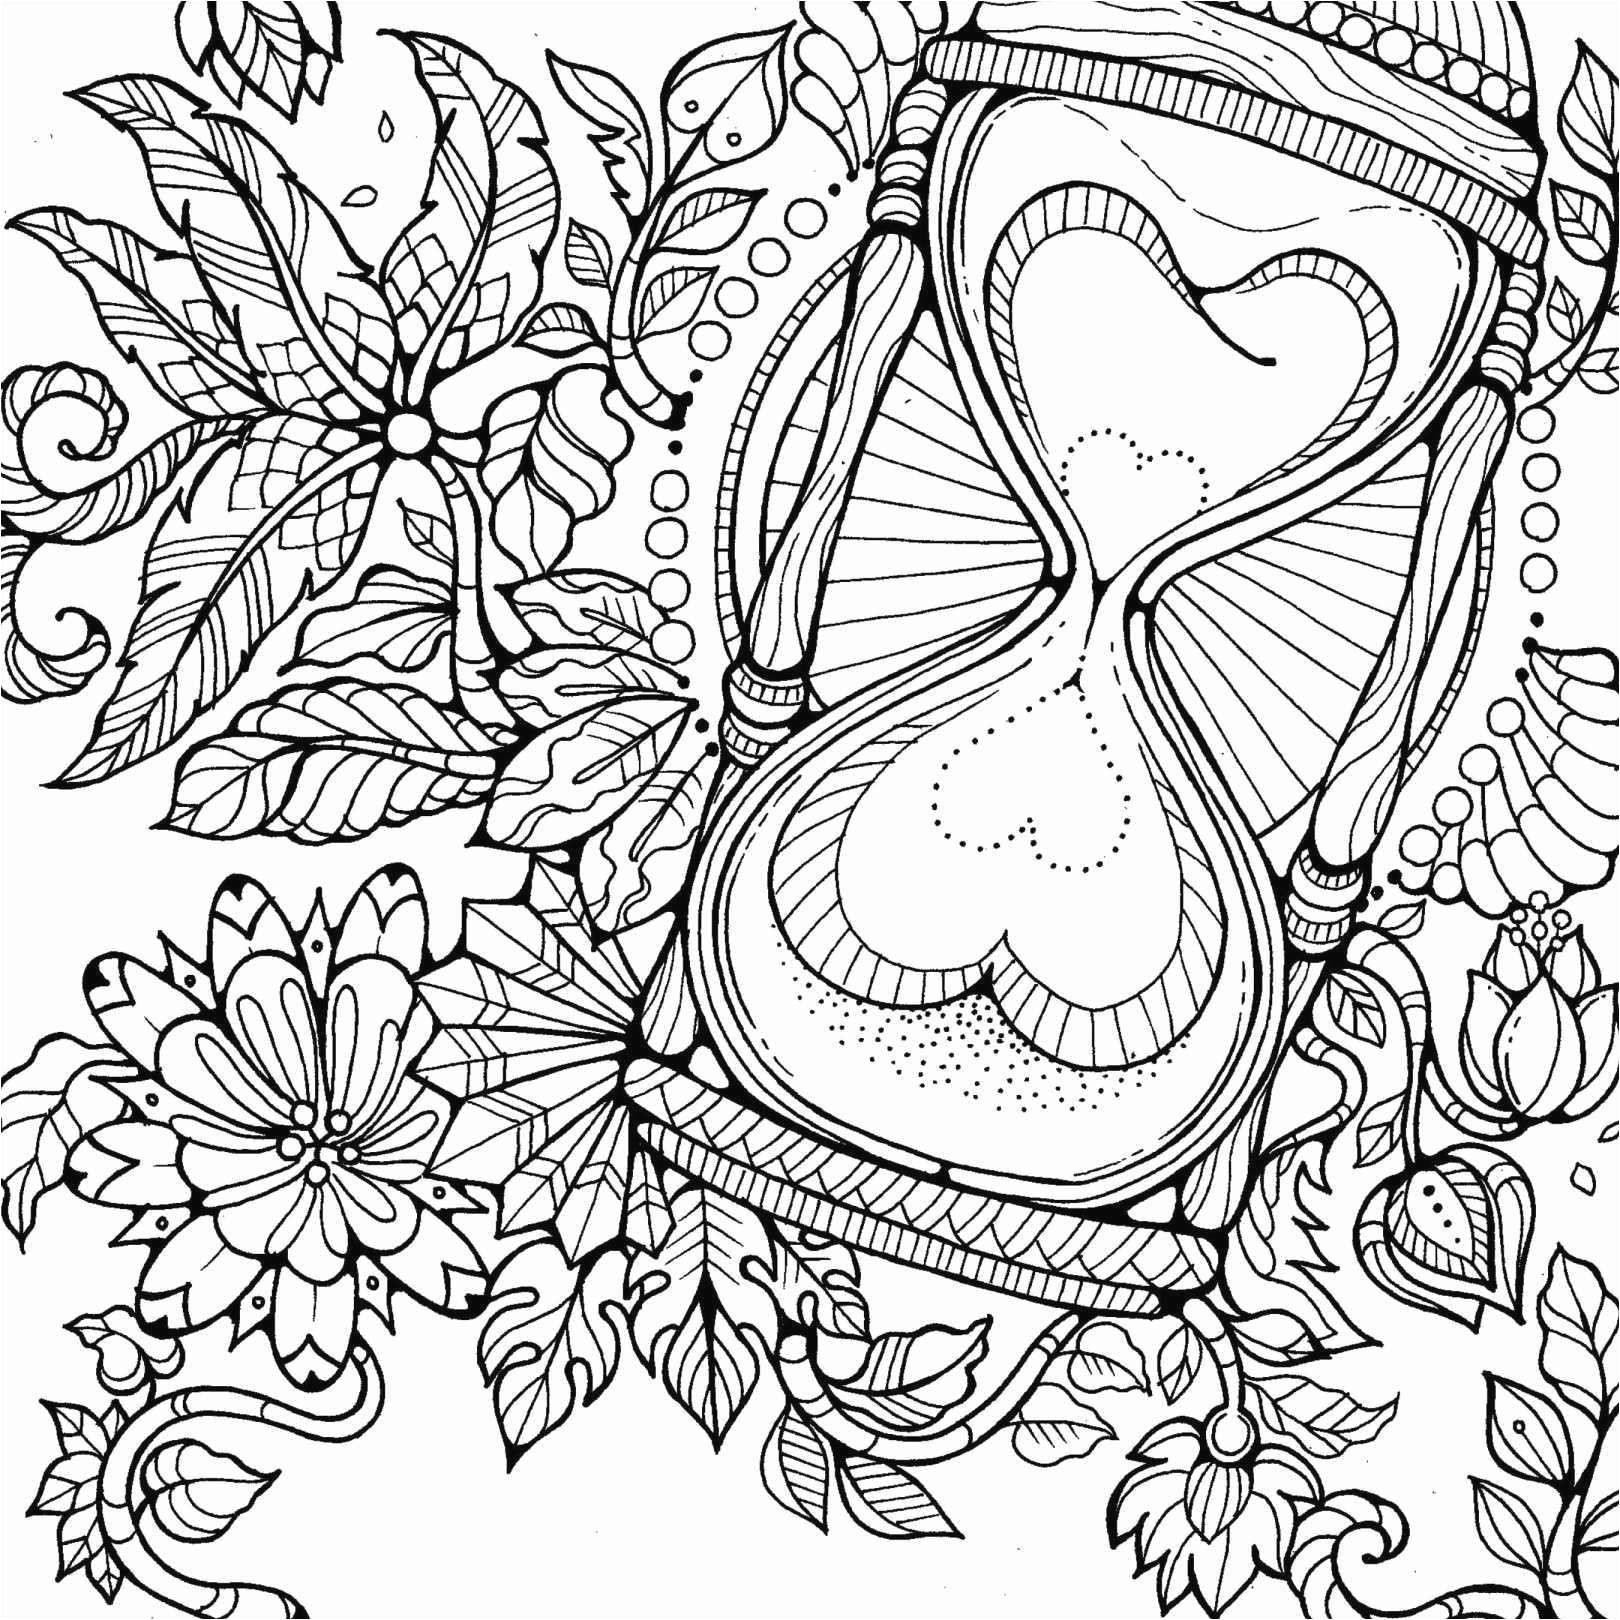 review coloring pages printable inspirational pages to color new color page luxury multiplication printables 0d christmas lovely christmas drawing ideas